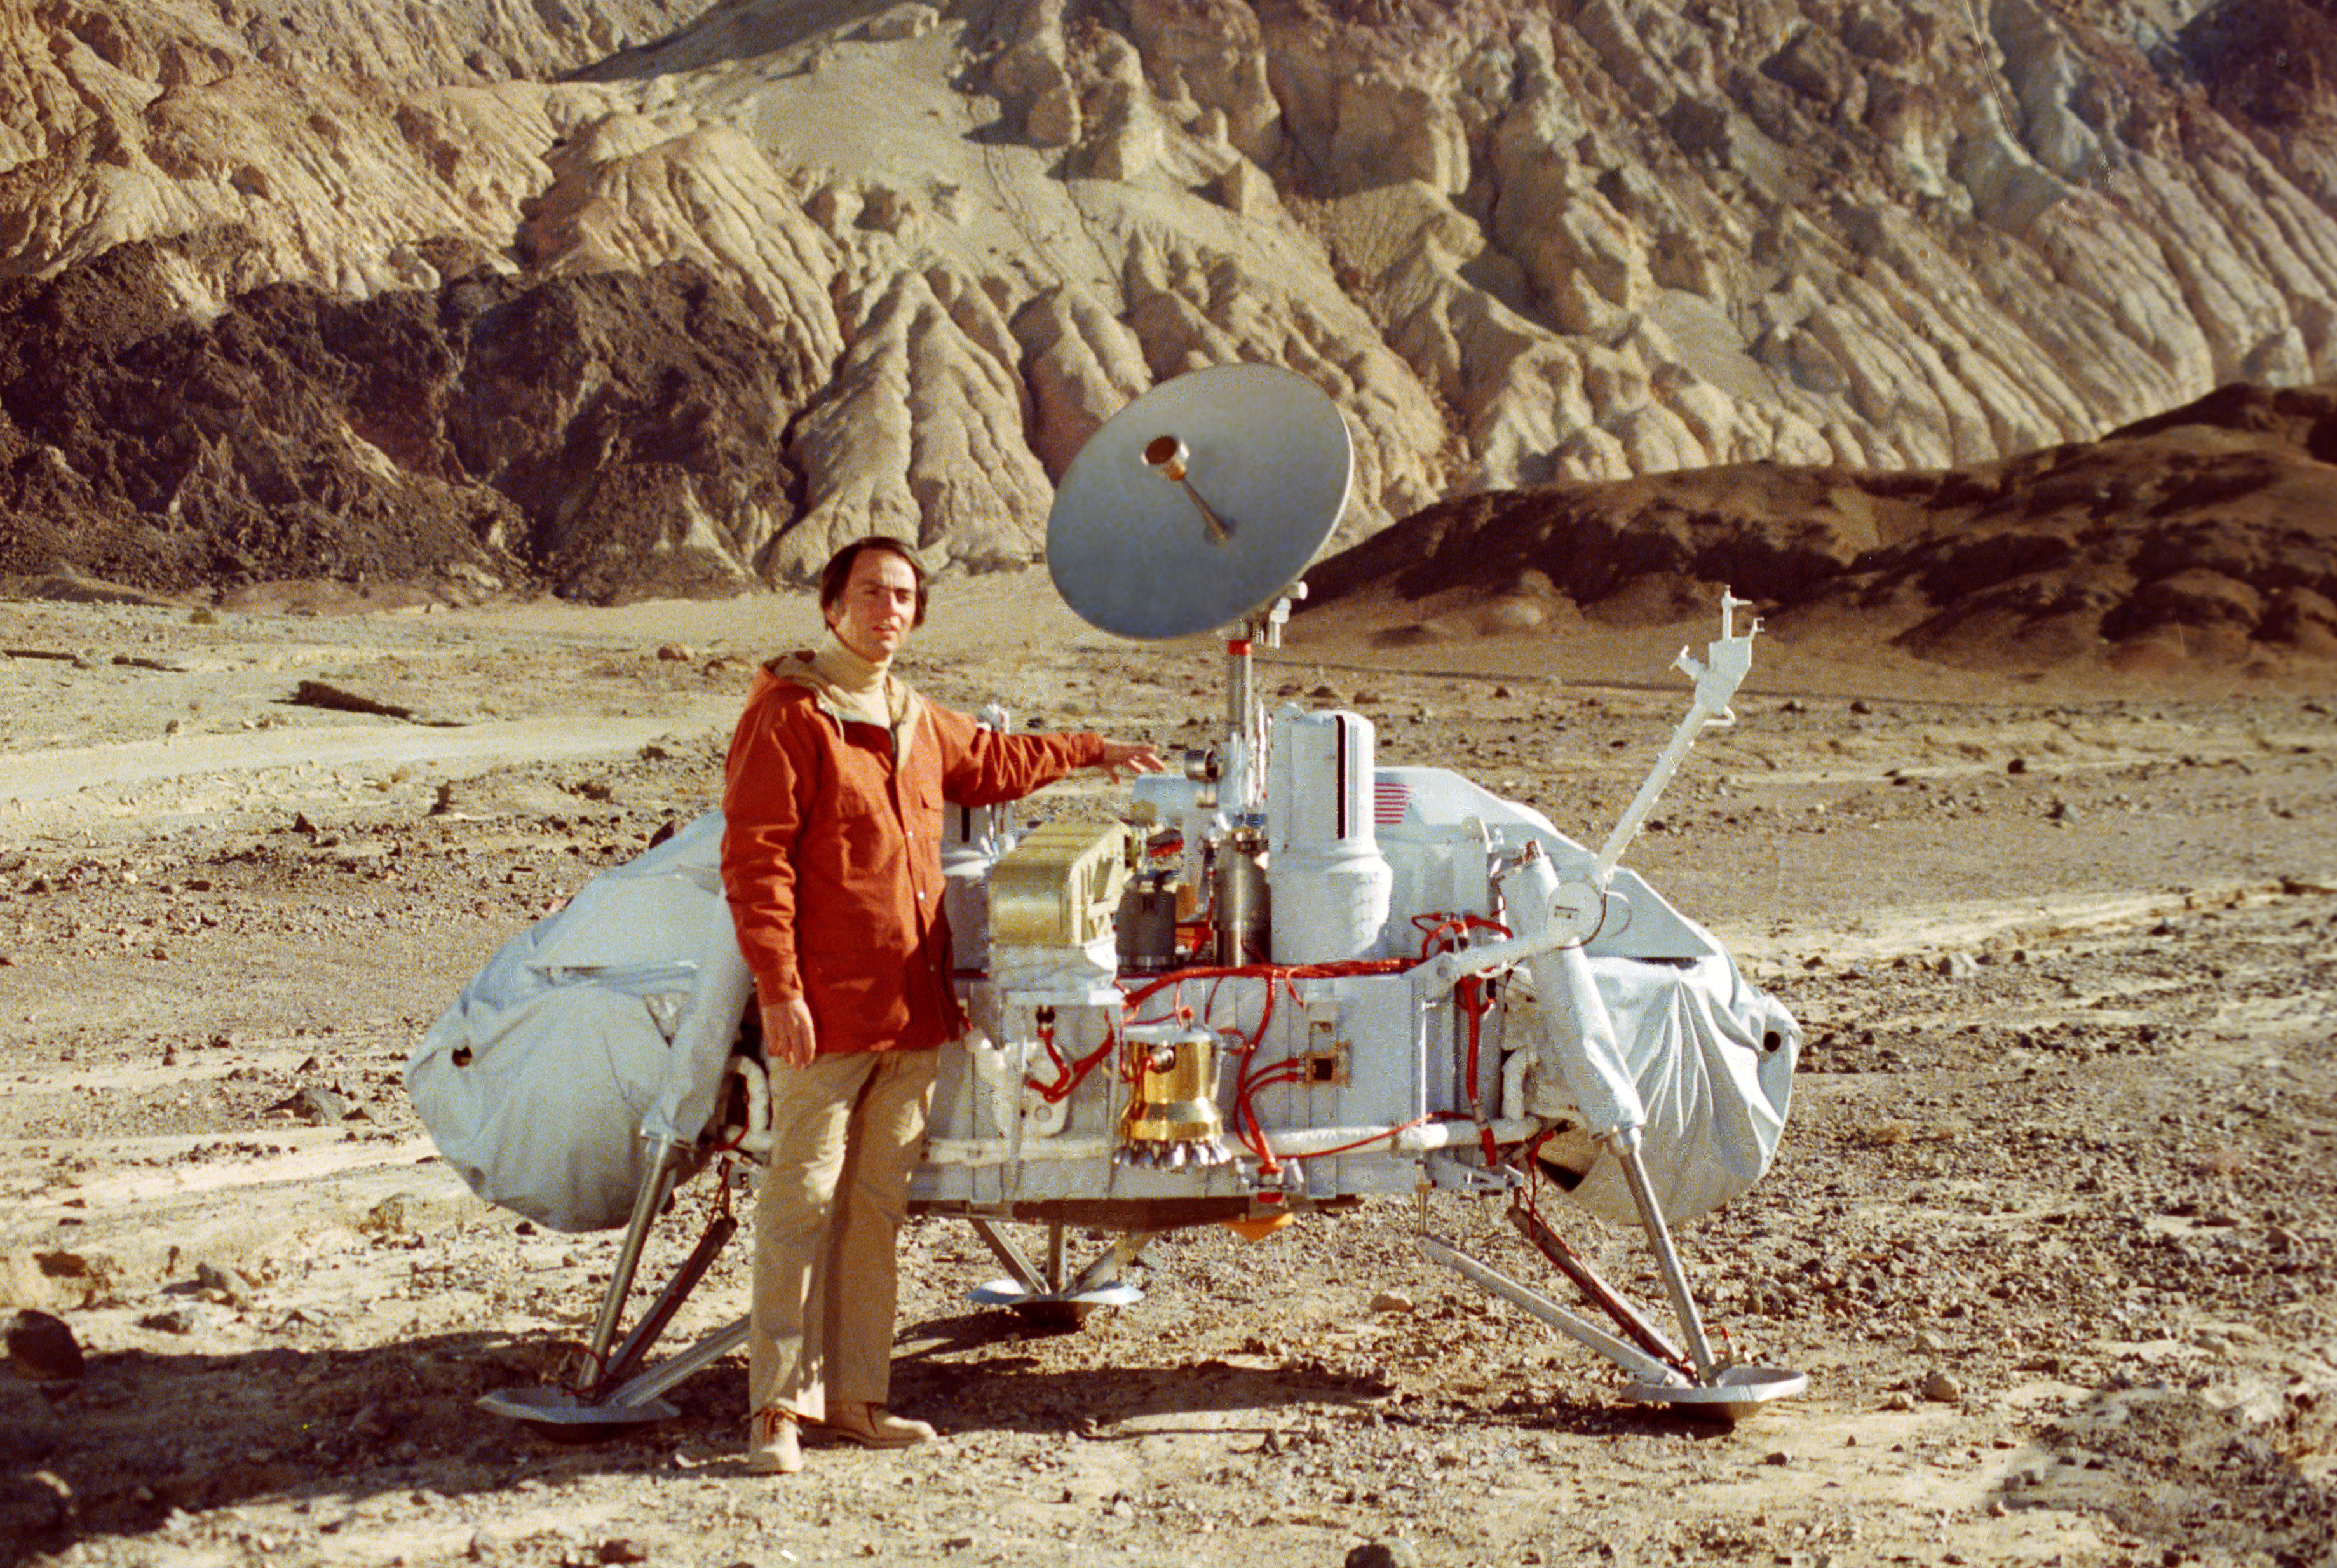 Carl Sagan poses with a model of the Viking lander in Death Valley, California